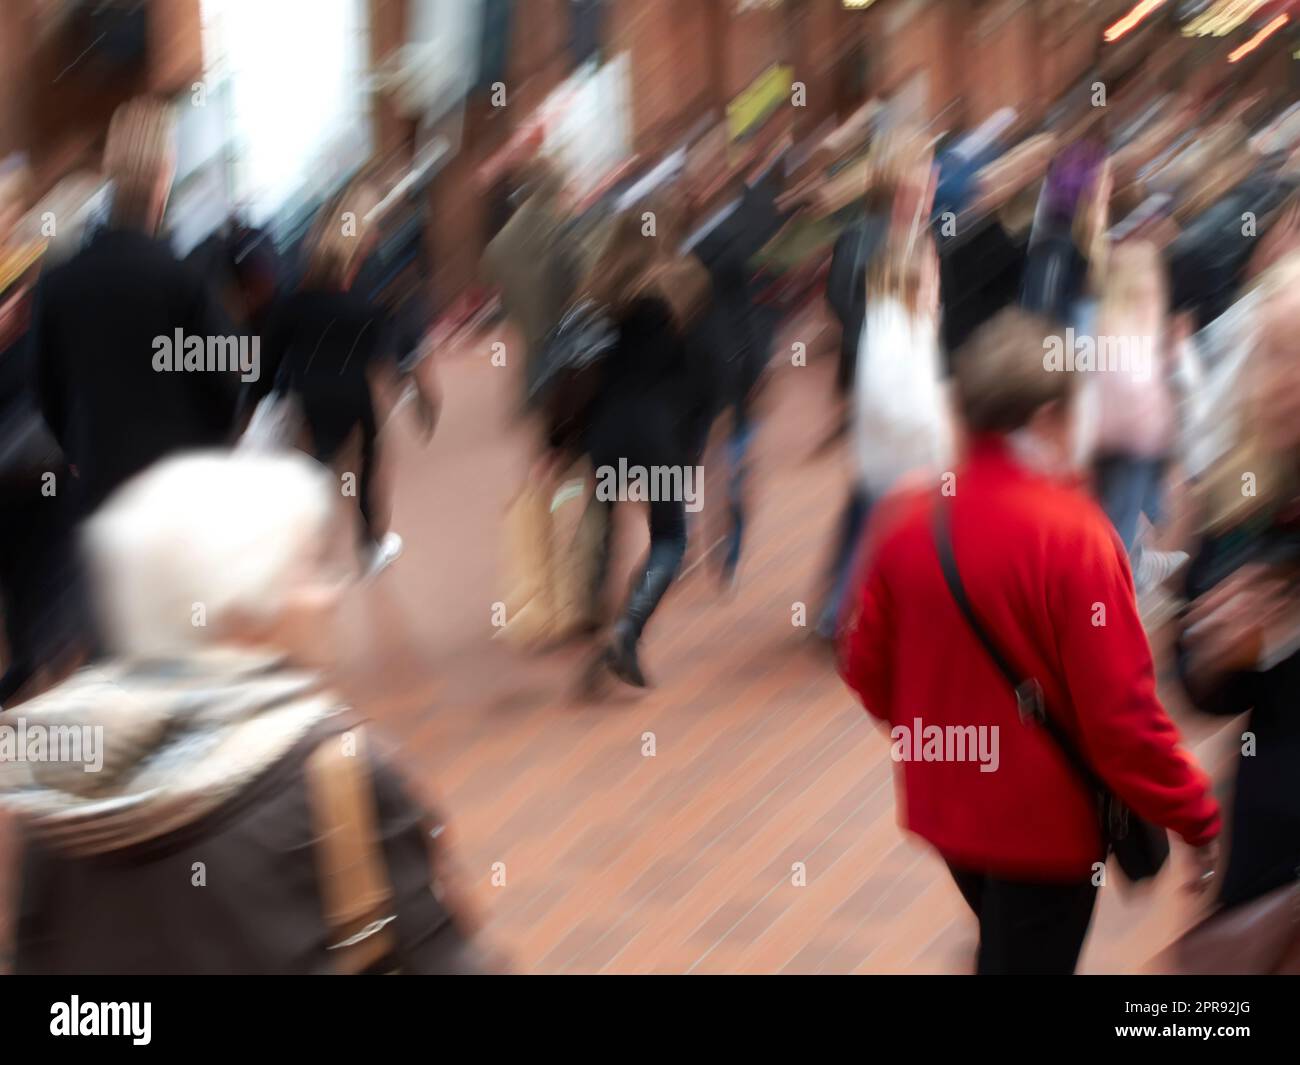 A group of people commuting through urban roads with blurred motion. A busy crowd of travelers arriving and walking together in a street in the city. Lots of tourists in defocused movement downtown Stock Photo